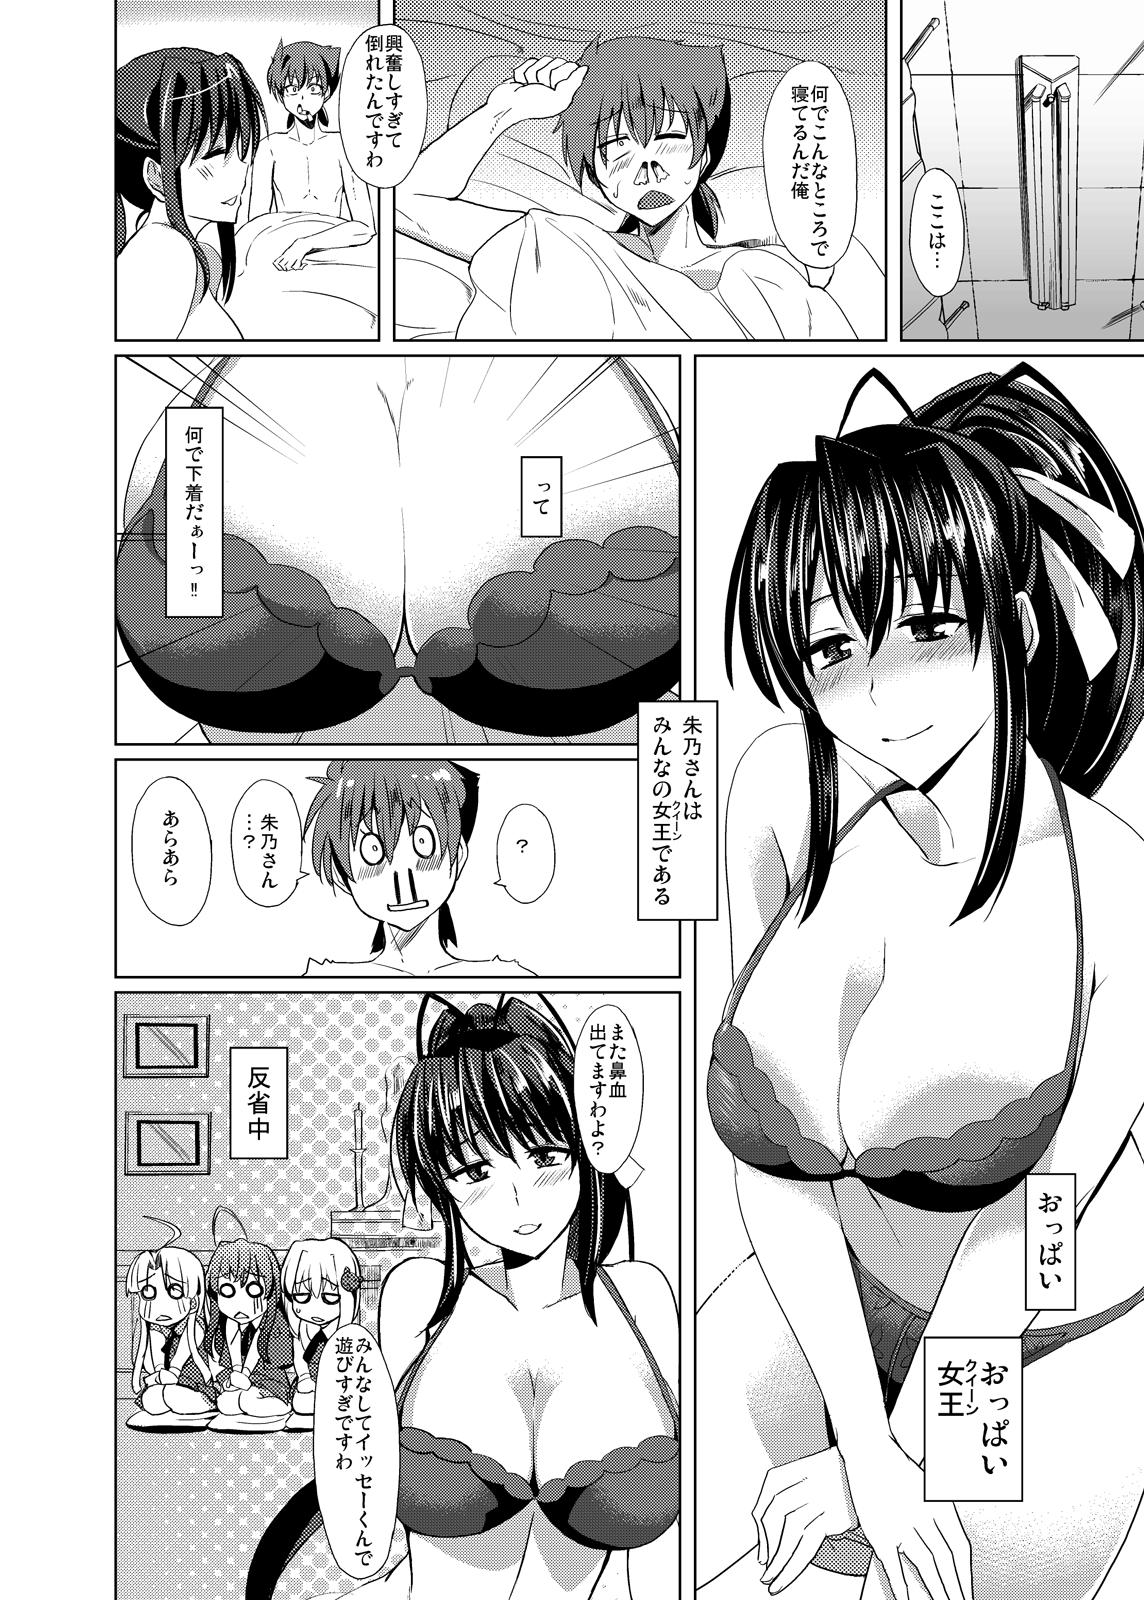 Bald Pussy Akeno-san to DxD - Highschool dxd Nipples - Page 4